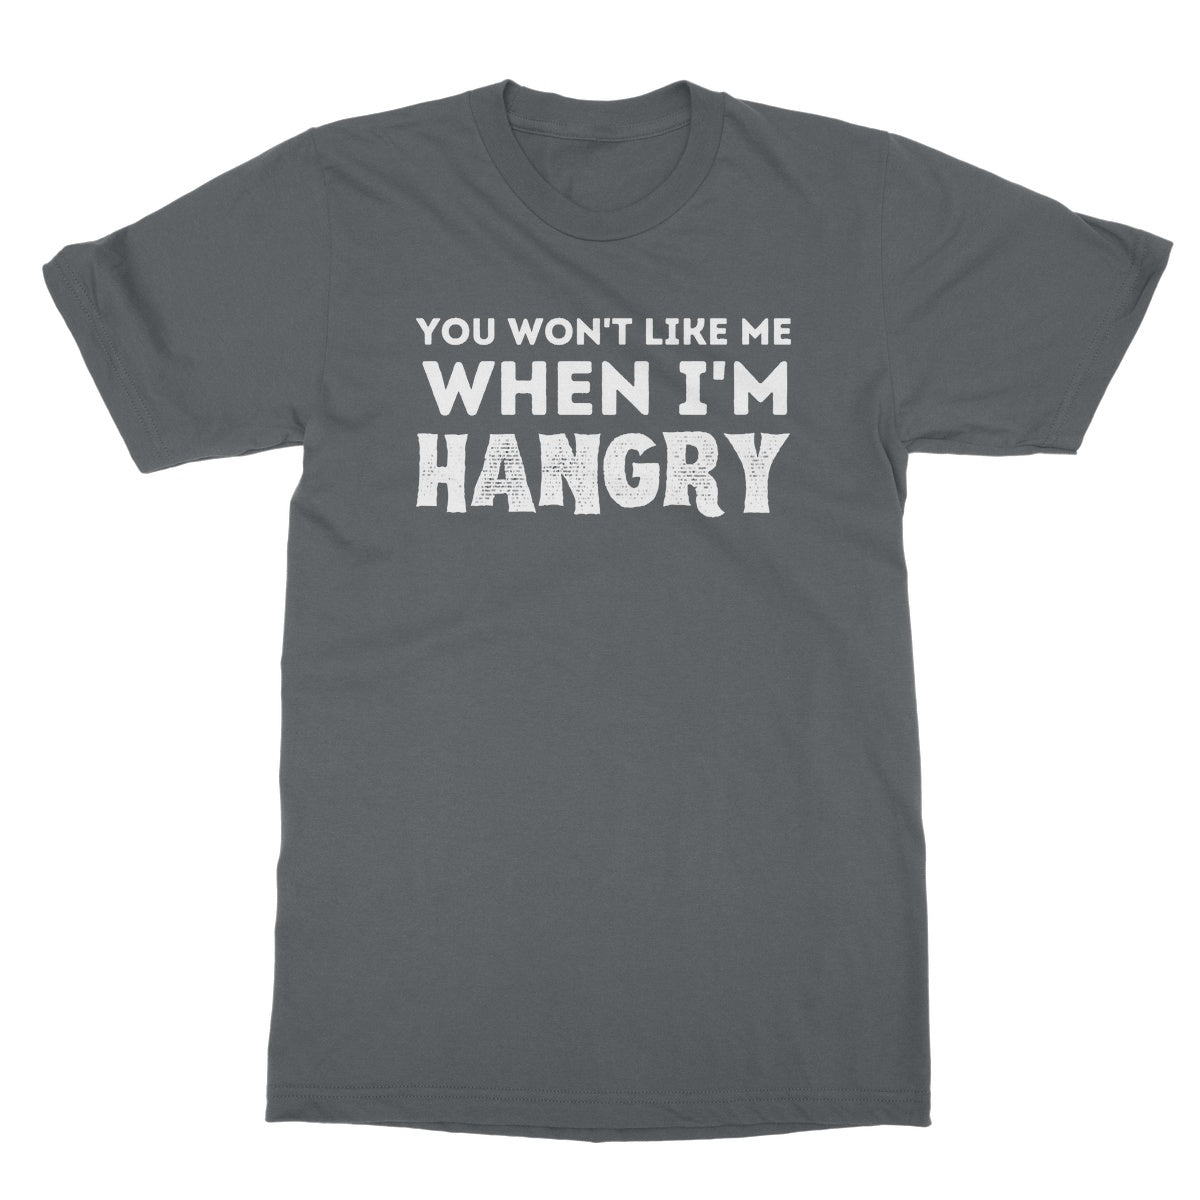 you won't like me when I'm hangry t shirt grey